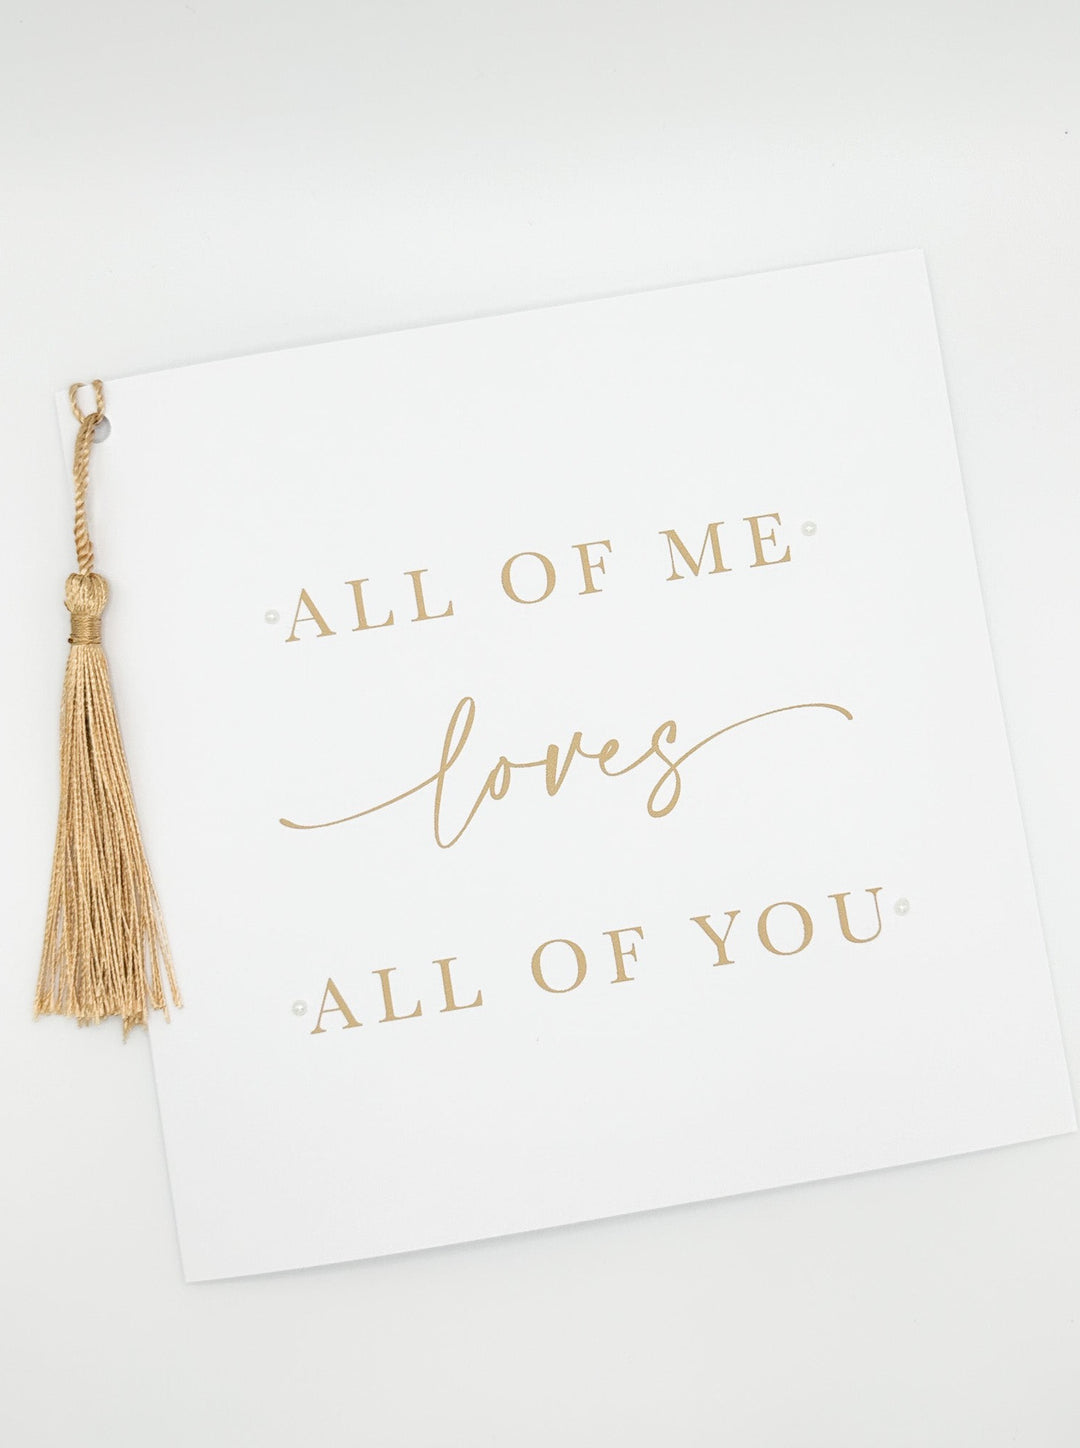 "All of me loves all of you" - Wedding Card